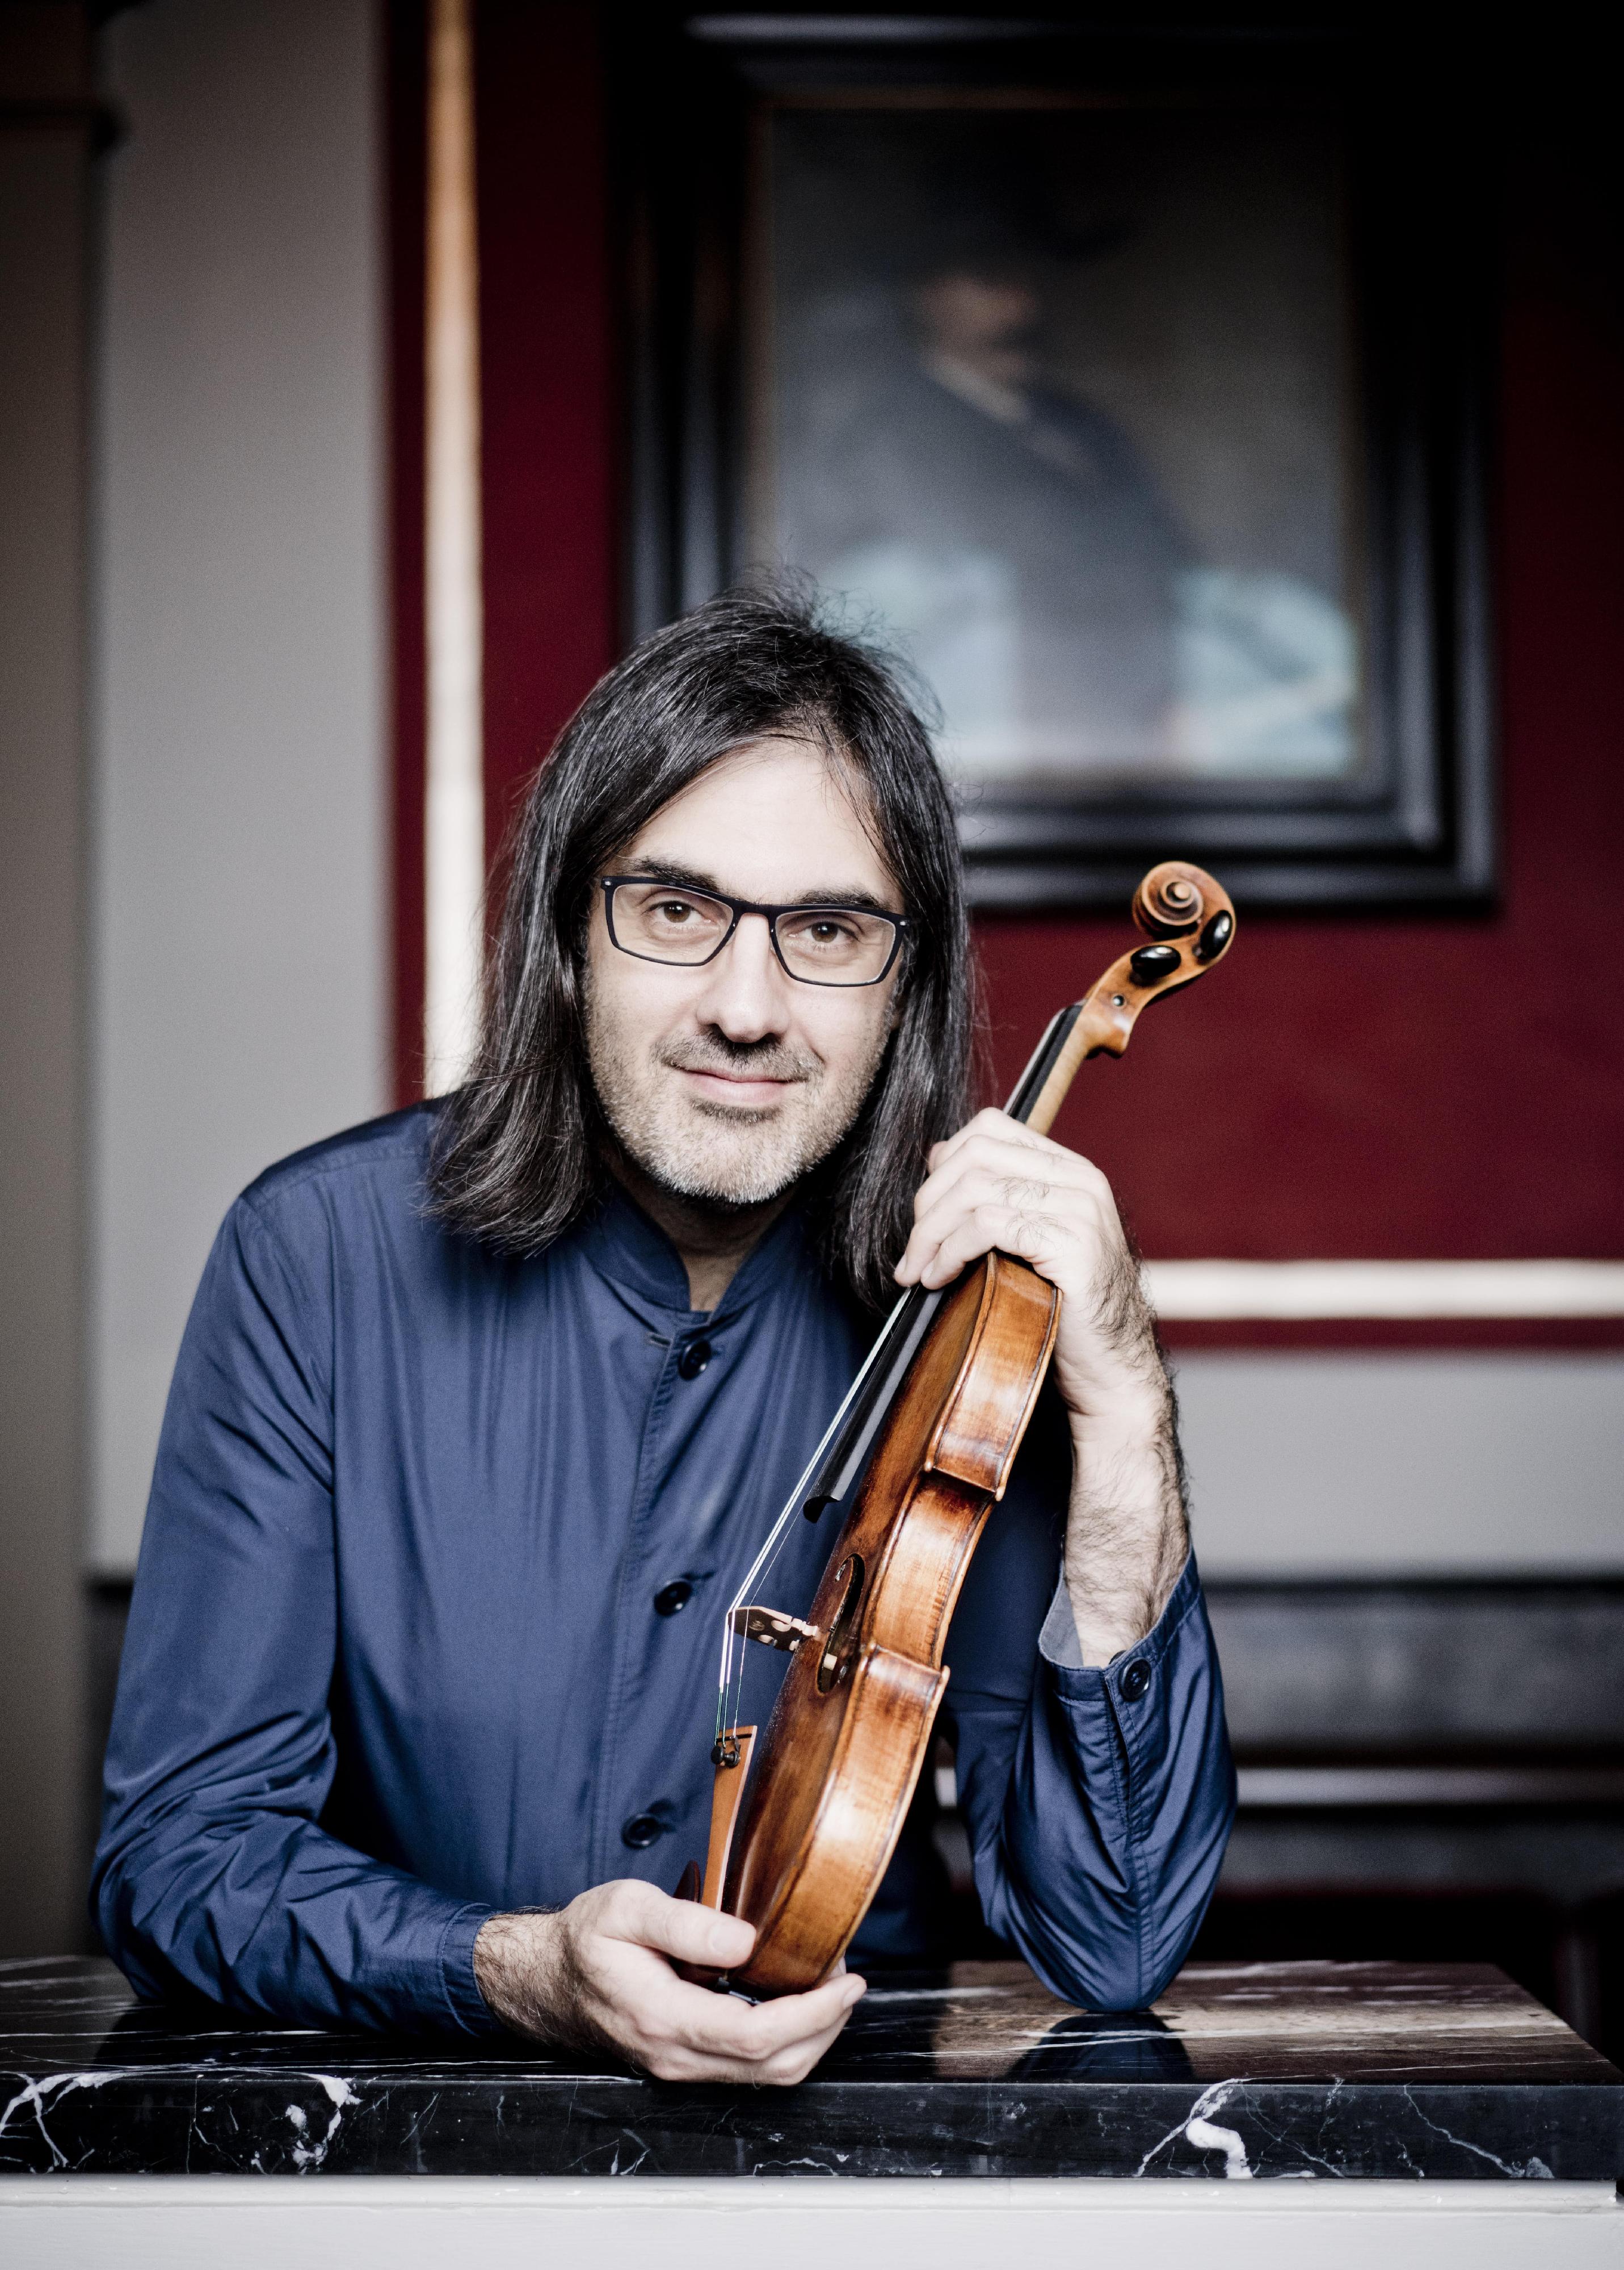 The Leisure and Cultural Services Department has invited violinist Leonidas Kavakos and pianist Enrico Pace to perform a recital in Hong Kong in October. Photo shows Leonidas Kavakos. (Source of photo: Marco Borggreve)